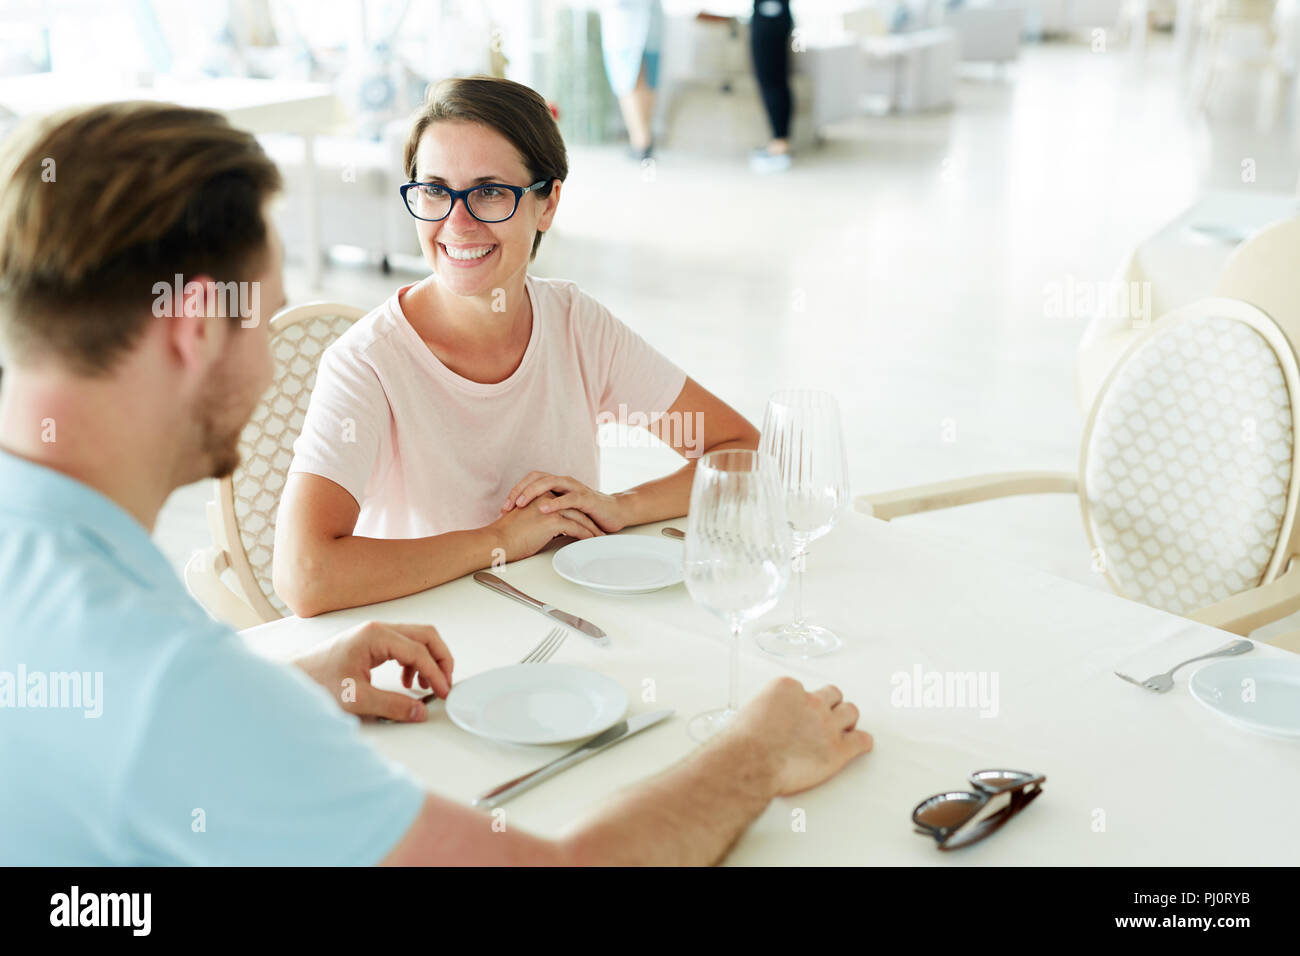 Couple Waiting for Food in Restaurant Stock Photo